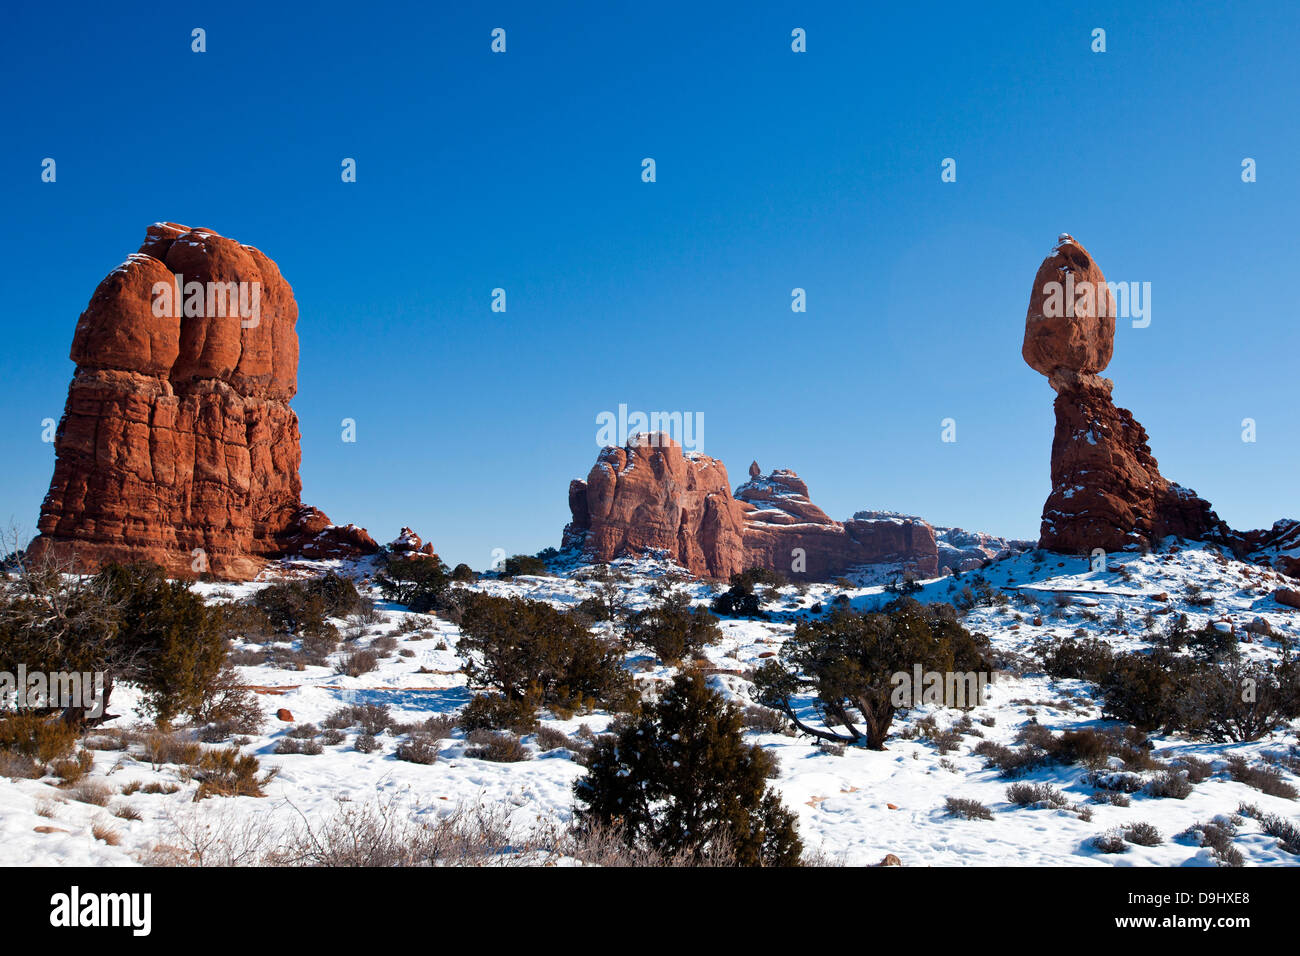 Balanced Rock during a winter morning with snow on the ground, Arches National Park, Utah, United States of America Stock Photo